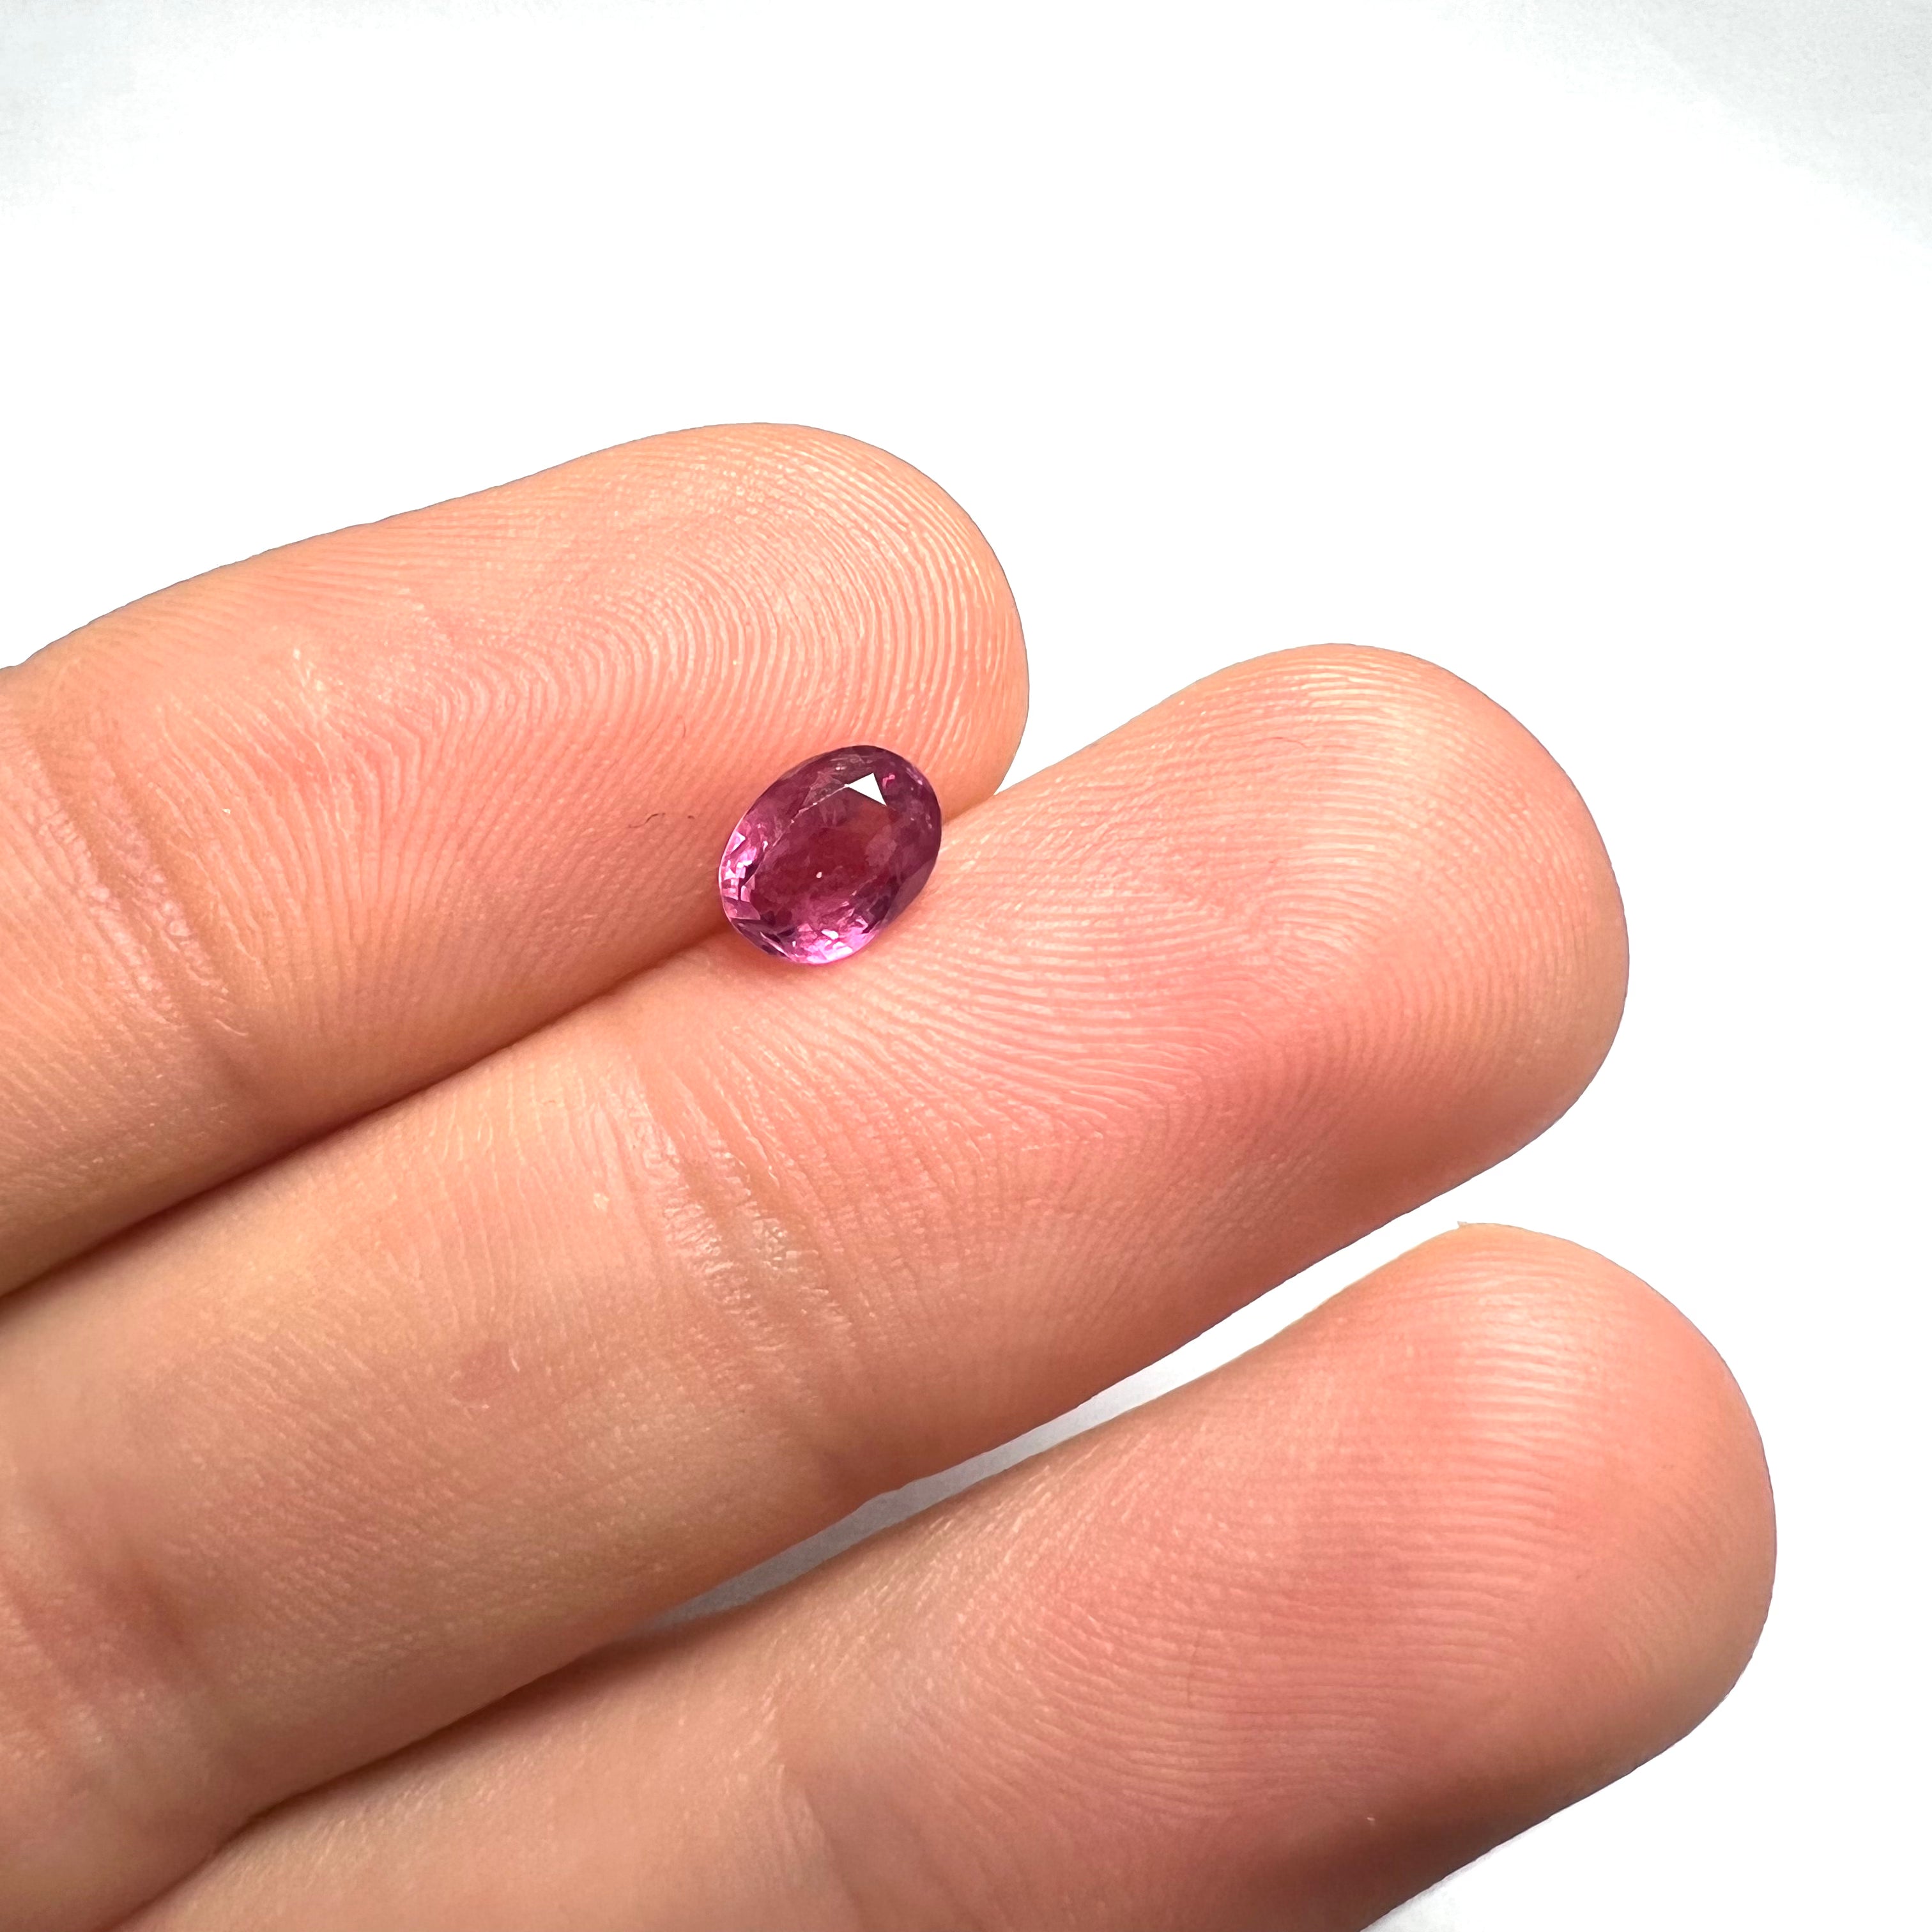 .88CTW Loose Natural Oval Ruby 6.5x5x2.5mm Earth mined Gemstone